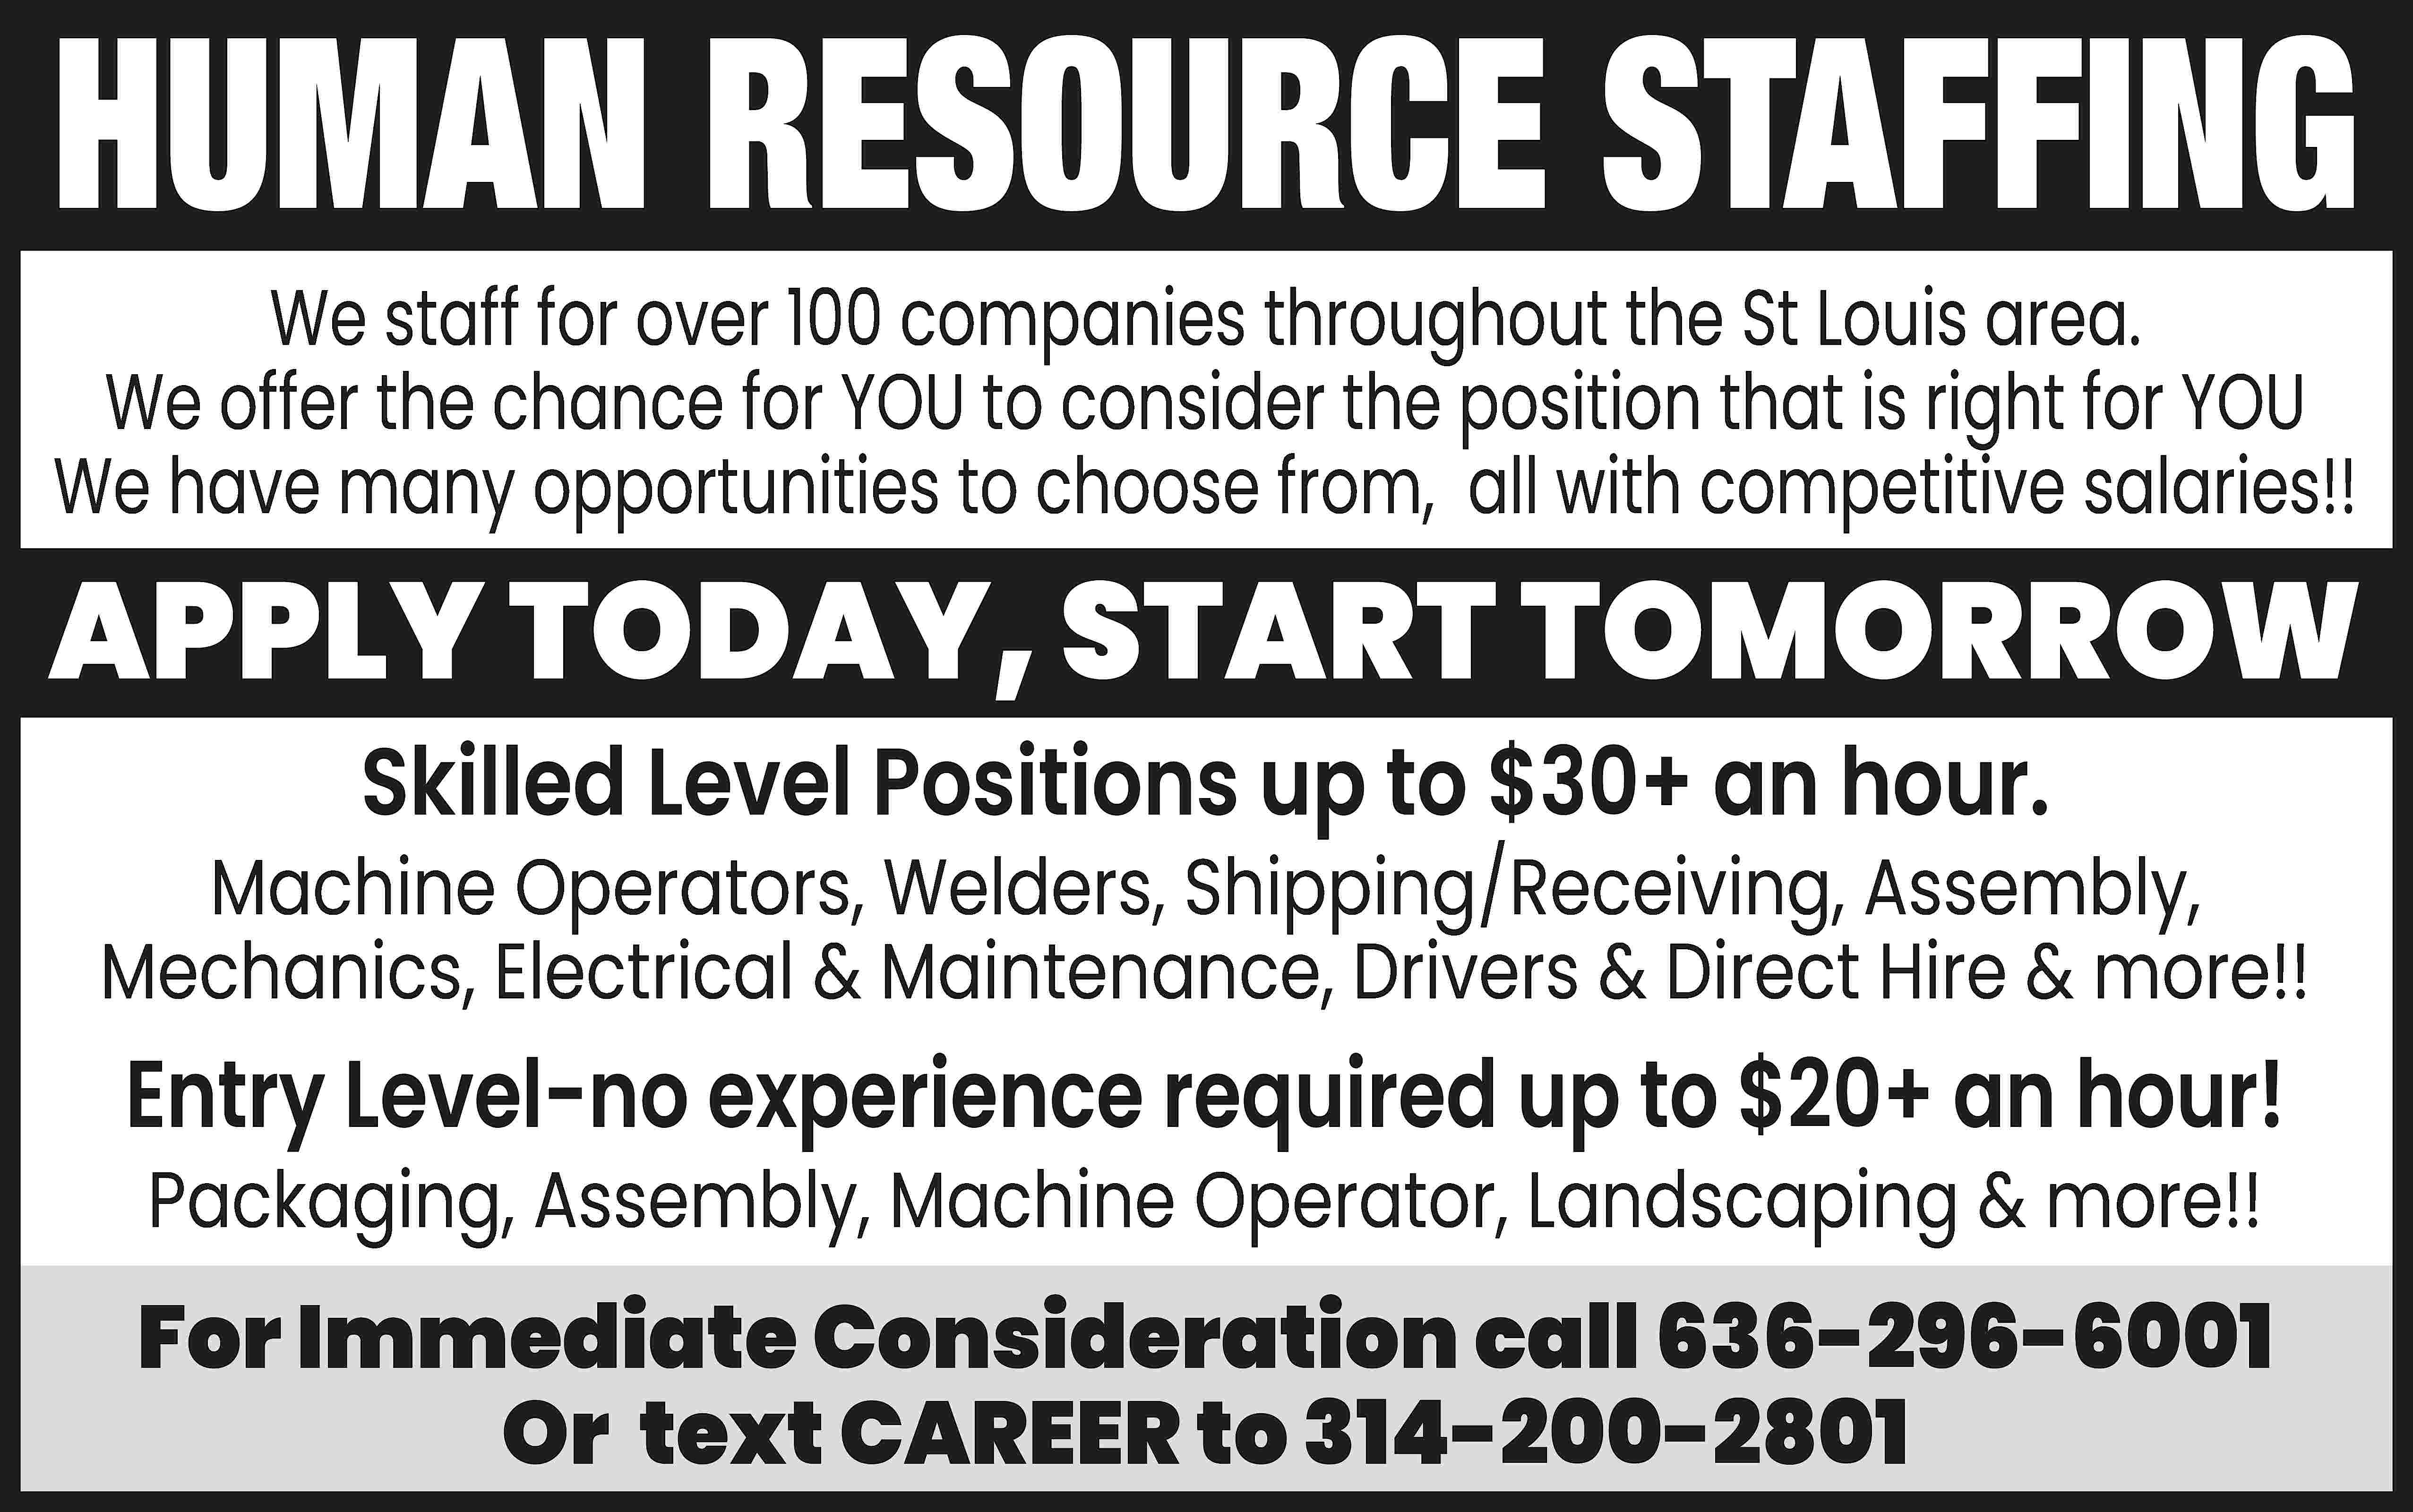 HUMAN RESOURCE STAFFING We staff  HUMAN RESOURCE STAFFING We staff for over 100 companies throughout the St Louis area. We offer the chance for YOU to consider the position that is right for YOU We have many opportunities to choose from, all with competitive salaries!! APPLY TODAY, START TOMORROW Skilled Level Positions up to $30+ an hour. Machine Operators, Welders, Shipping/Receiving, Assembly, Mechanics, Electrical & Maintenance, Drivers & Direct Hire & more!! Entry Level-no experience required up to $20+ an hour! Packaging, Assembly, Machine Operator, Landscaping & more!! For Immediate Consideration call 636-296-6001 Or text CAREER to 314-200-2801